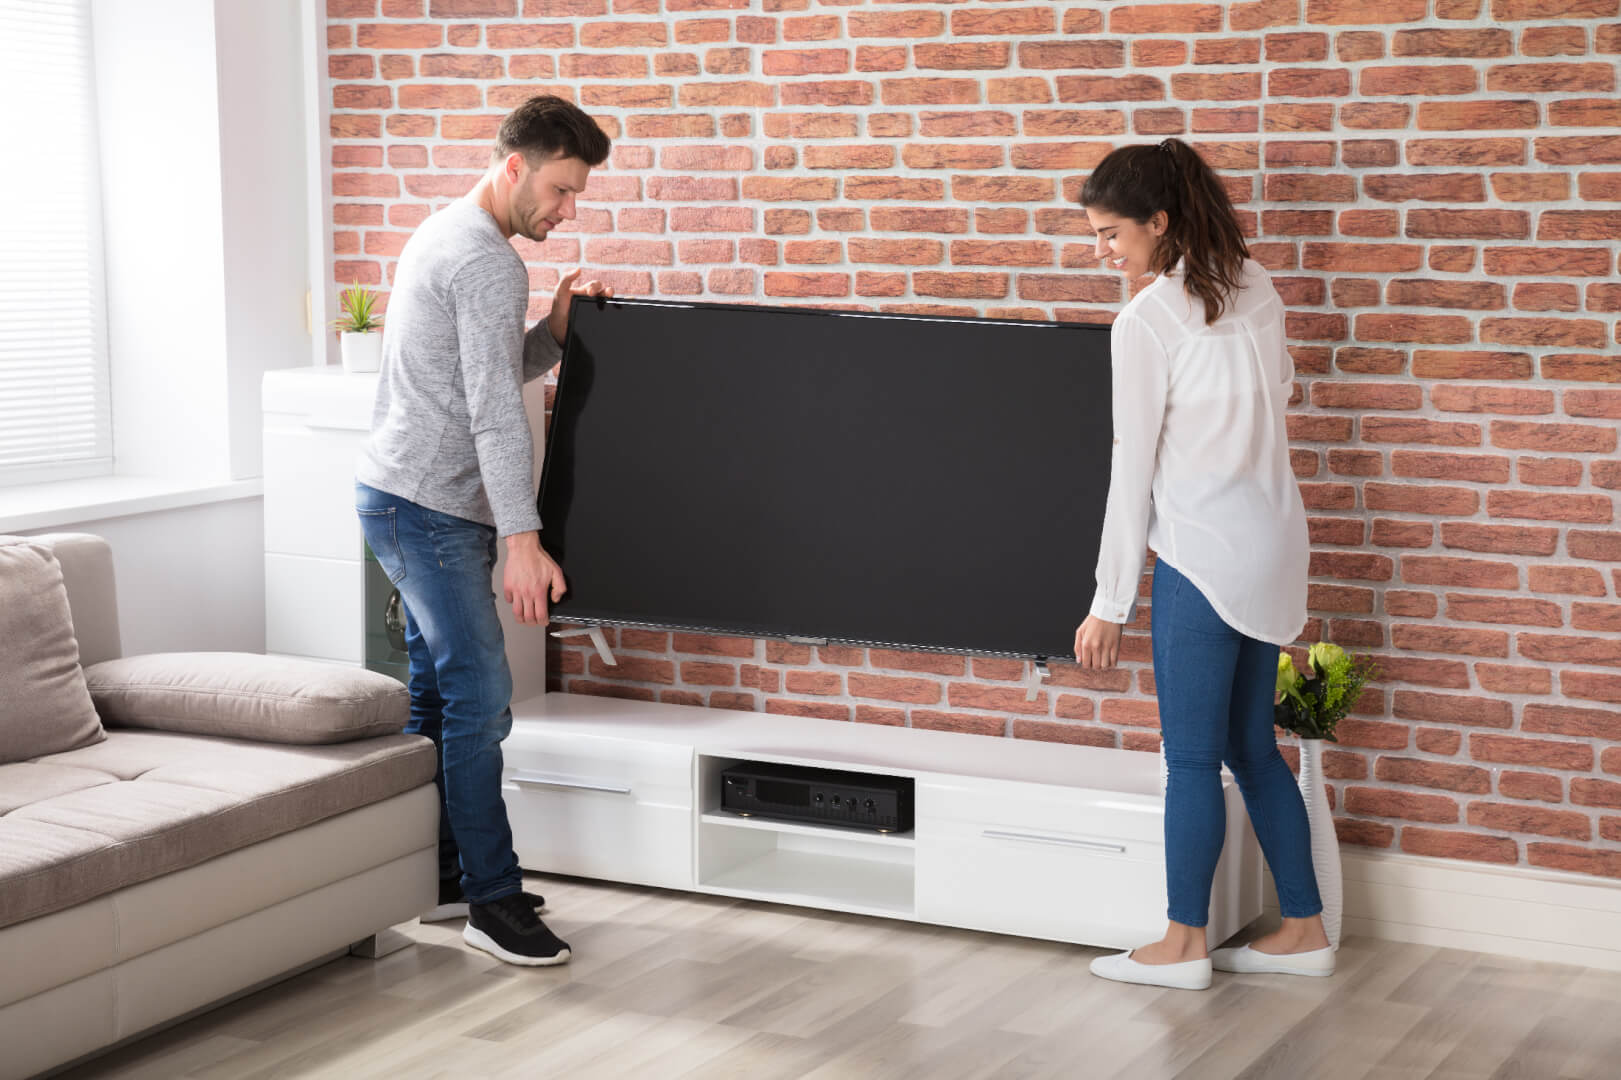 Couple moves television in living room